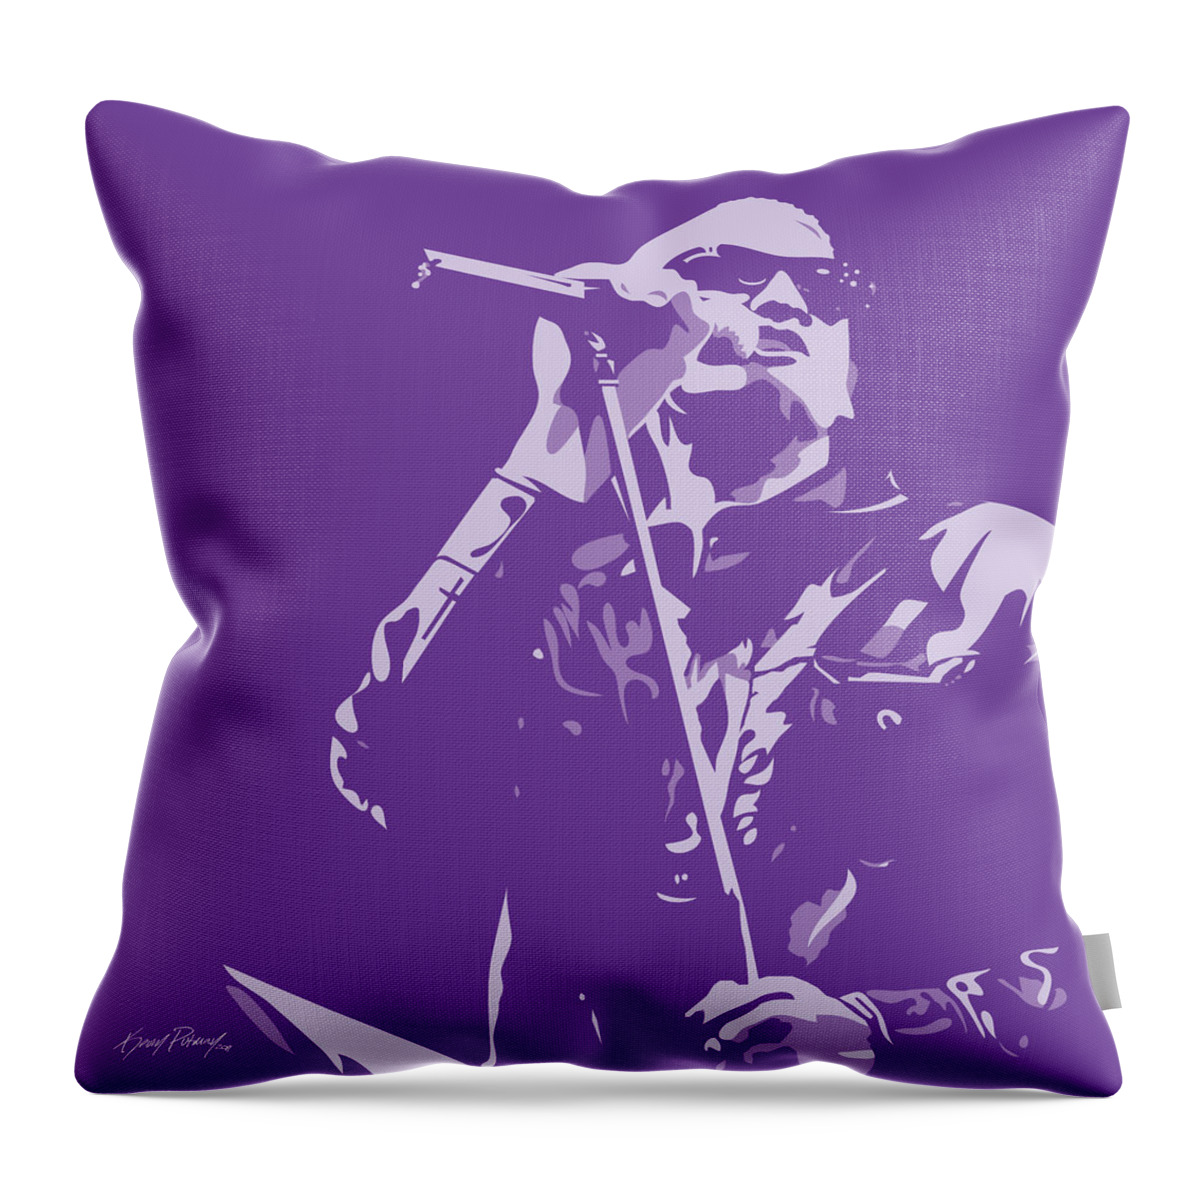 Layne Staley Throw Pillow featuring the digital art Layne Staley by Kevin Putman